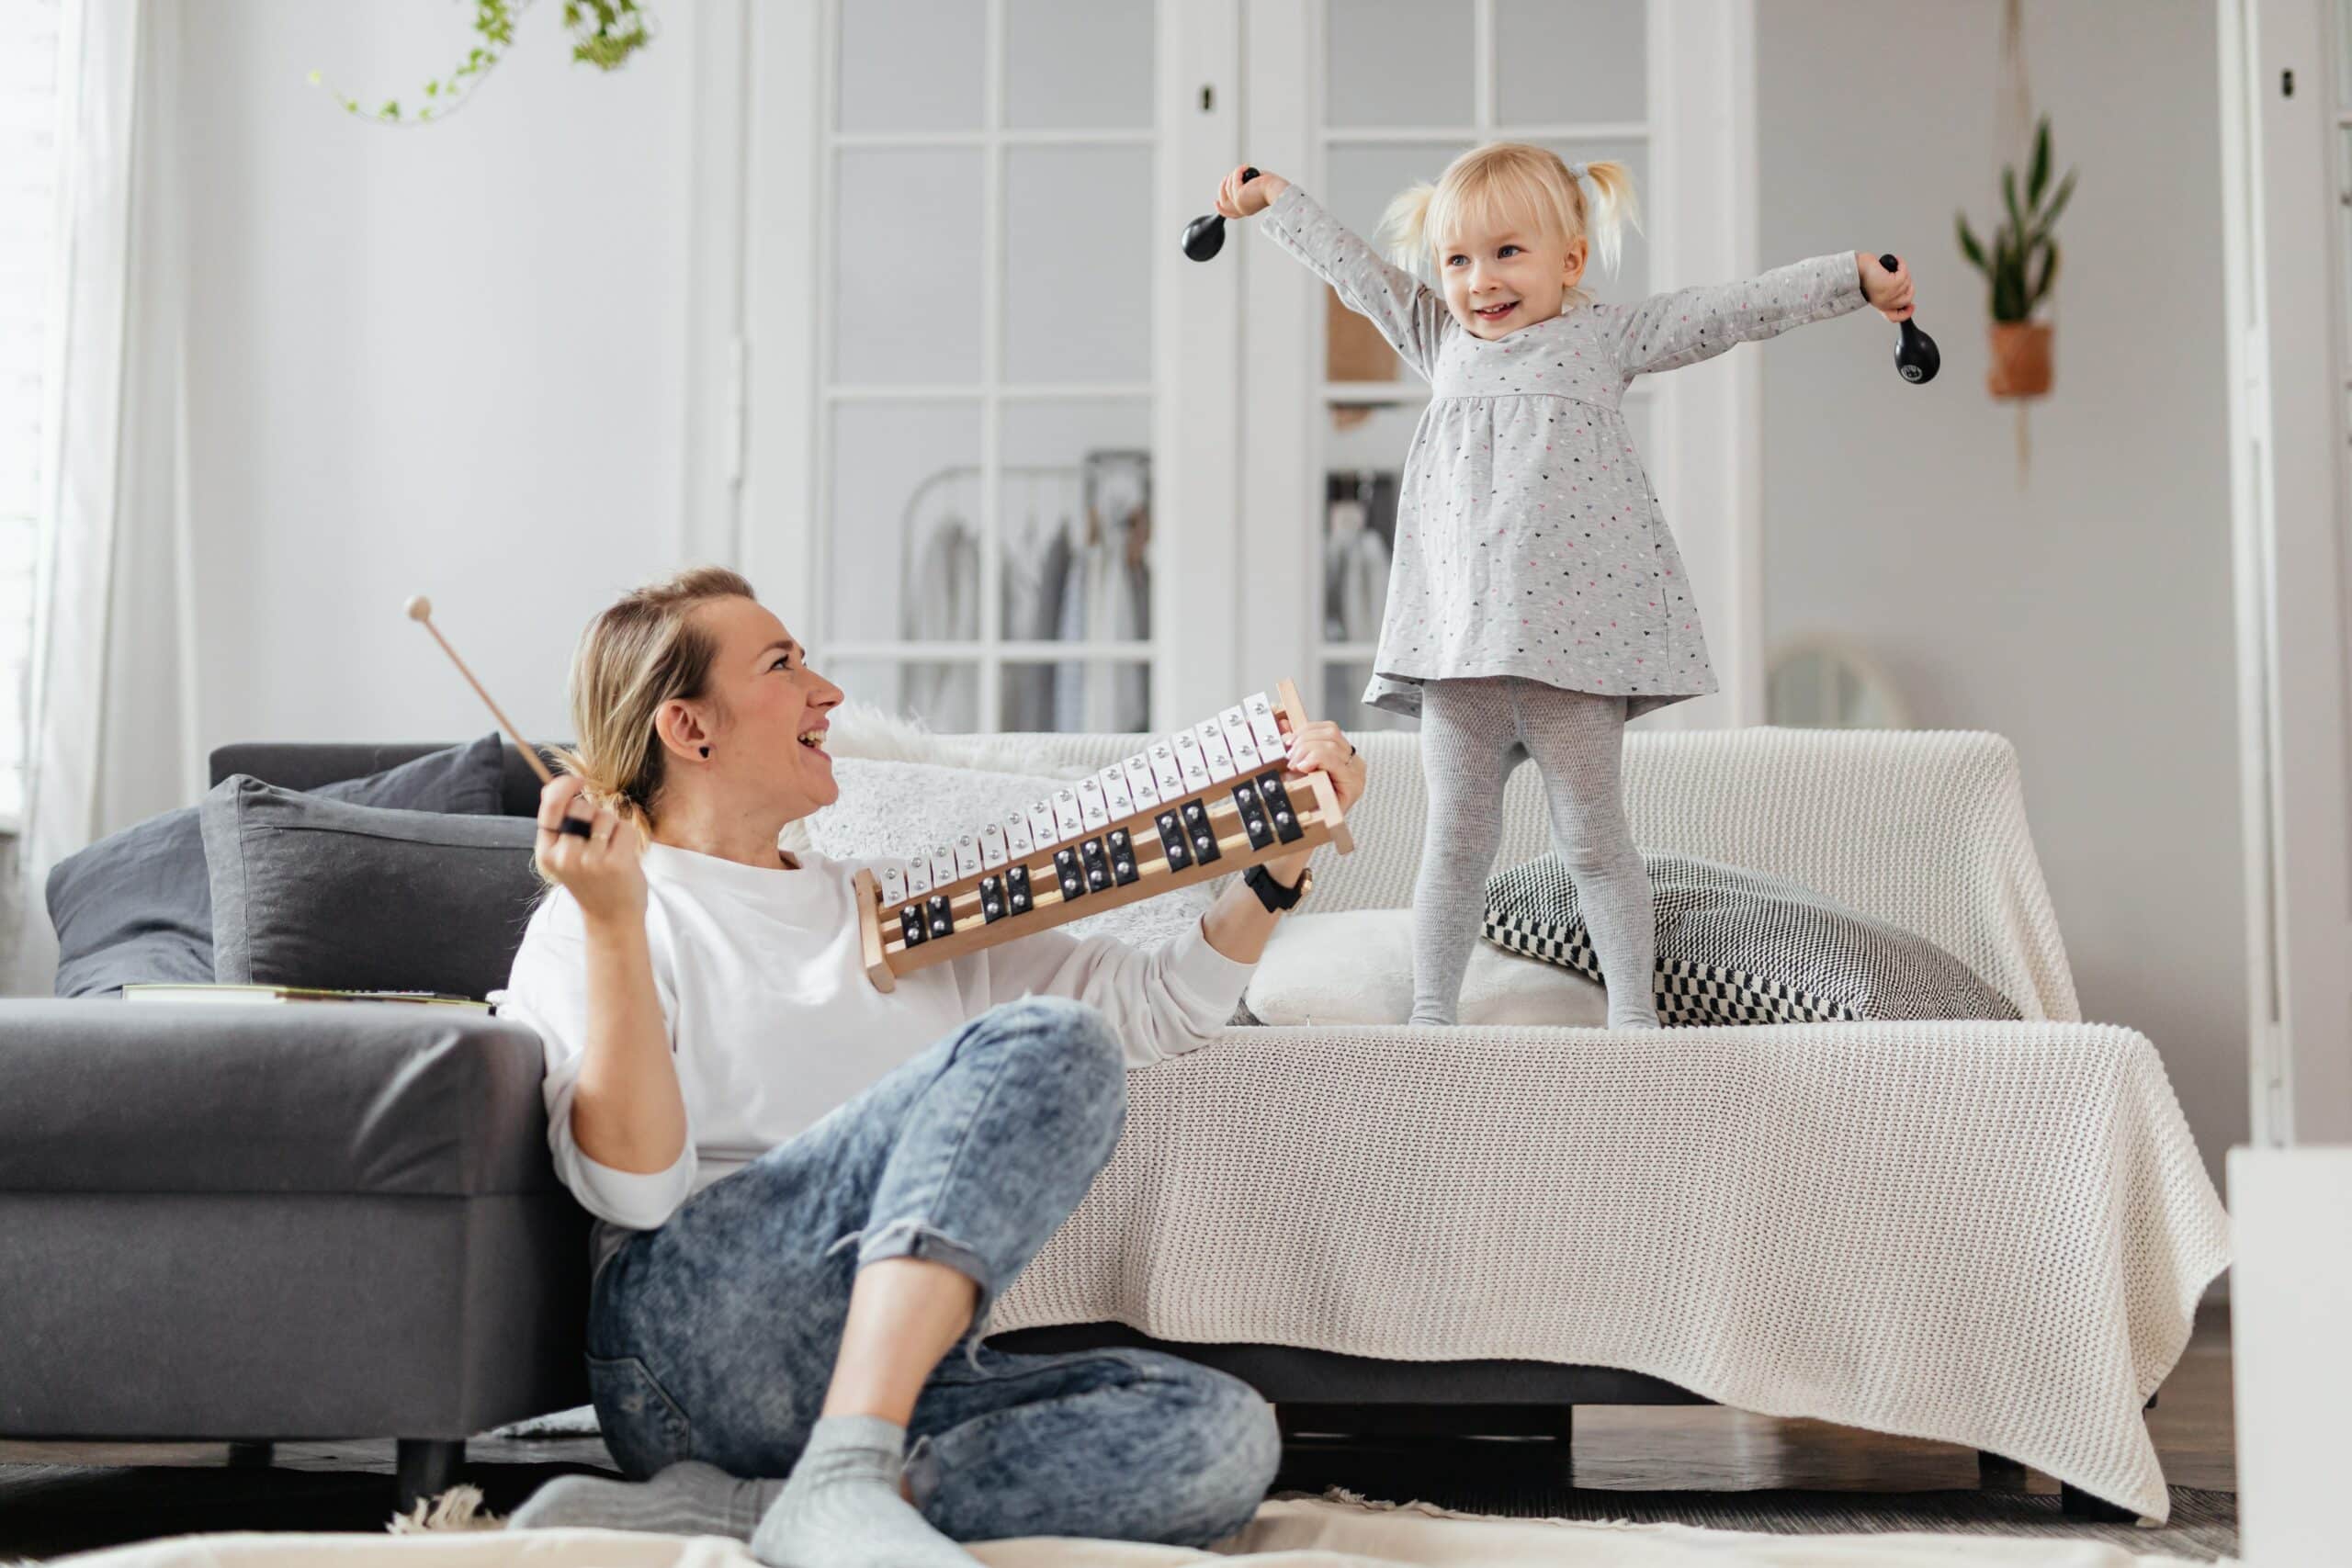 Children who engage in music and dance sessions guided by their nannies express themselves creatively and develop rhythm